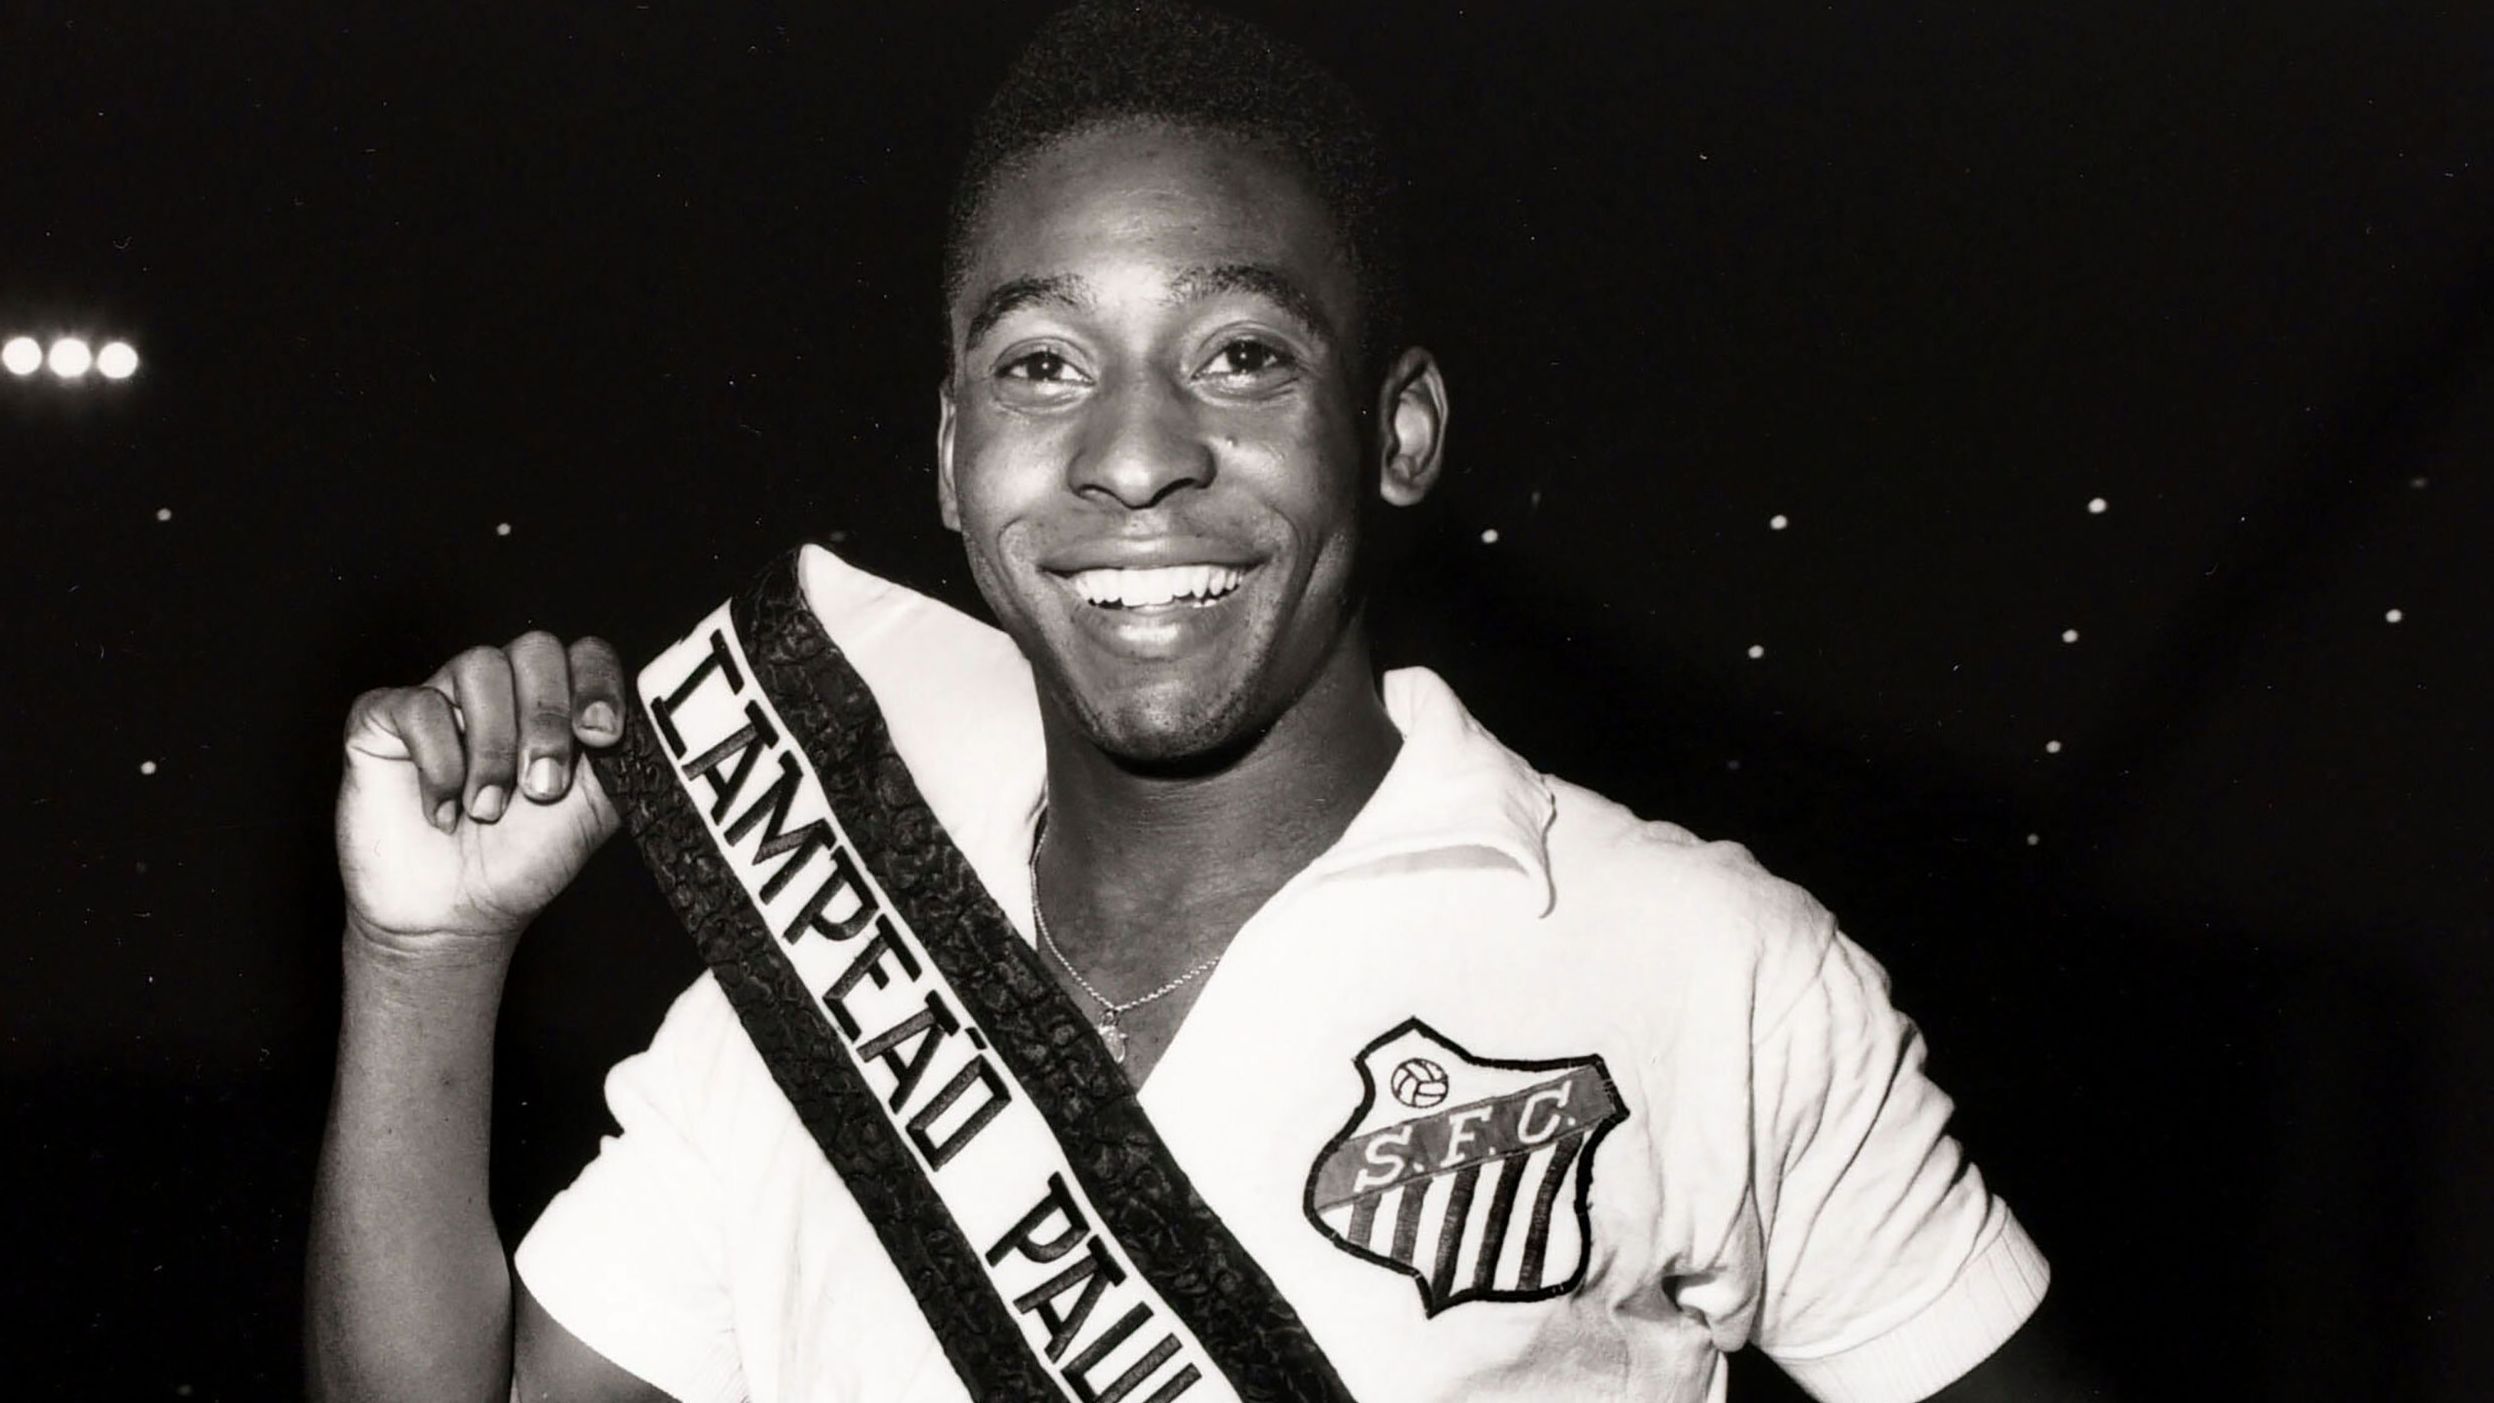 Pelé wears a sash after Santos became São Paulo state champions in 1961. Pelé played for the club from 1956-1974, scoring 618 goals and winning six Brazilian league titles. In 1962 and 1963, Santos won the Copa Libertadores, which is South America's premier club competition.